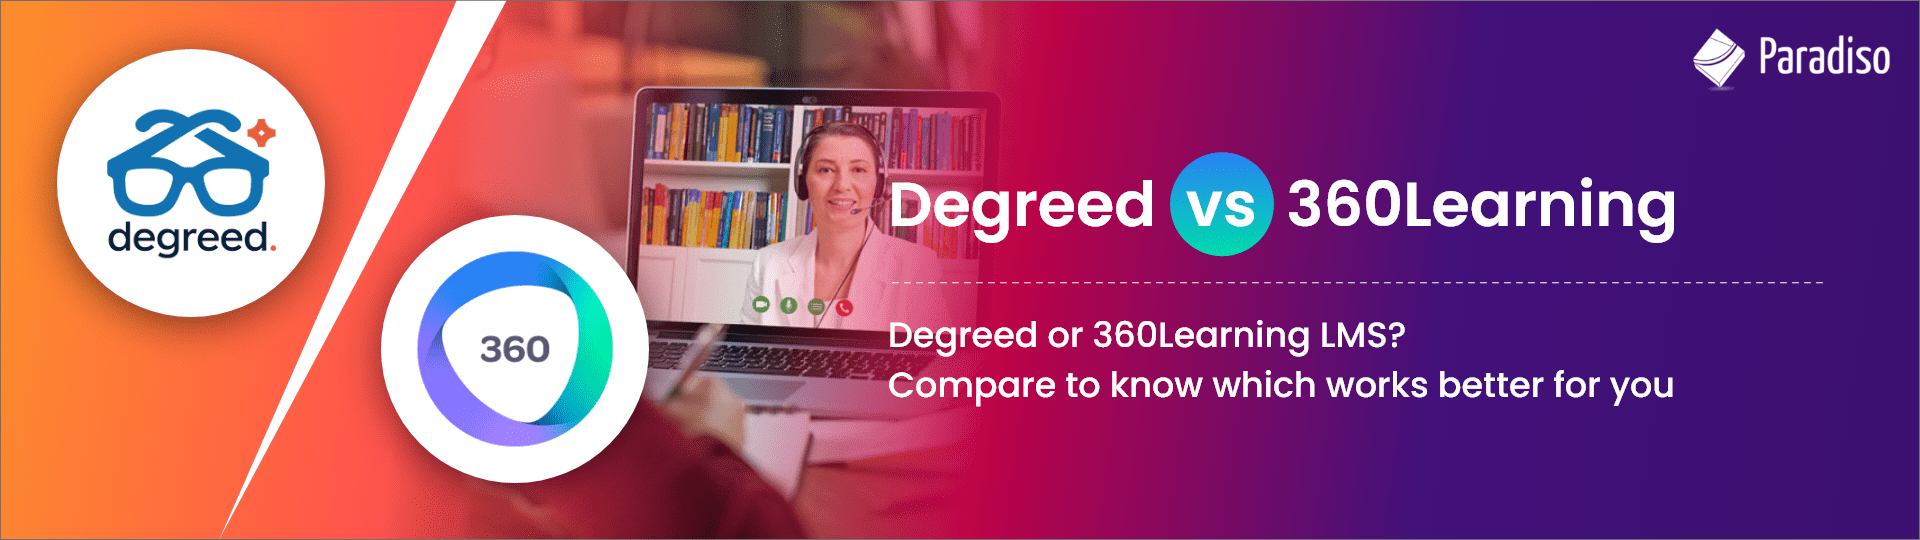 Degreed vs 360Learning Comparison